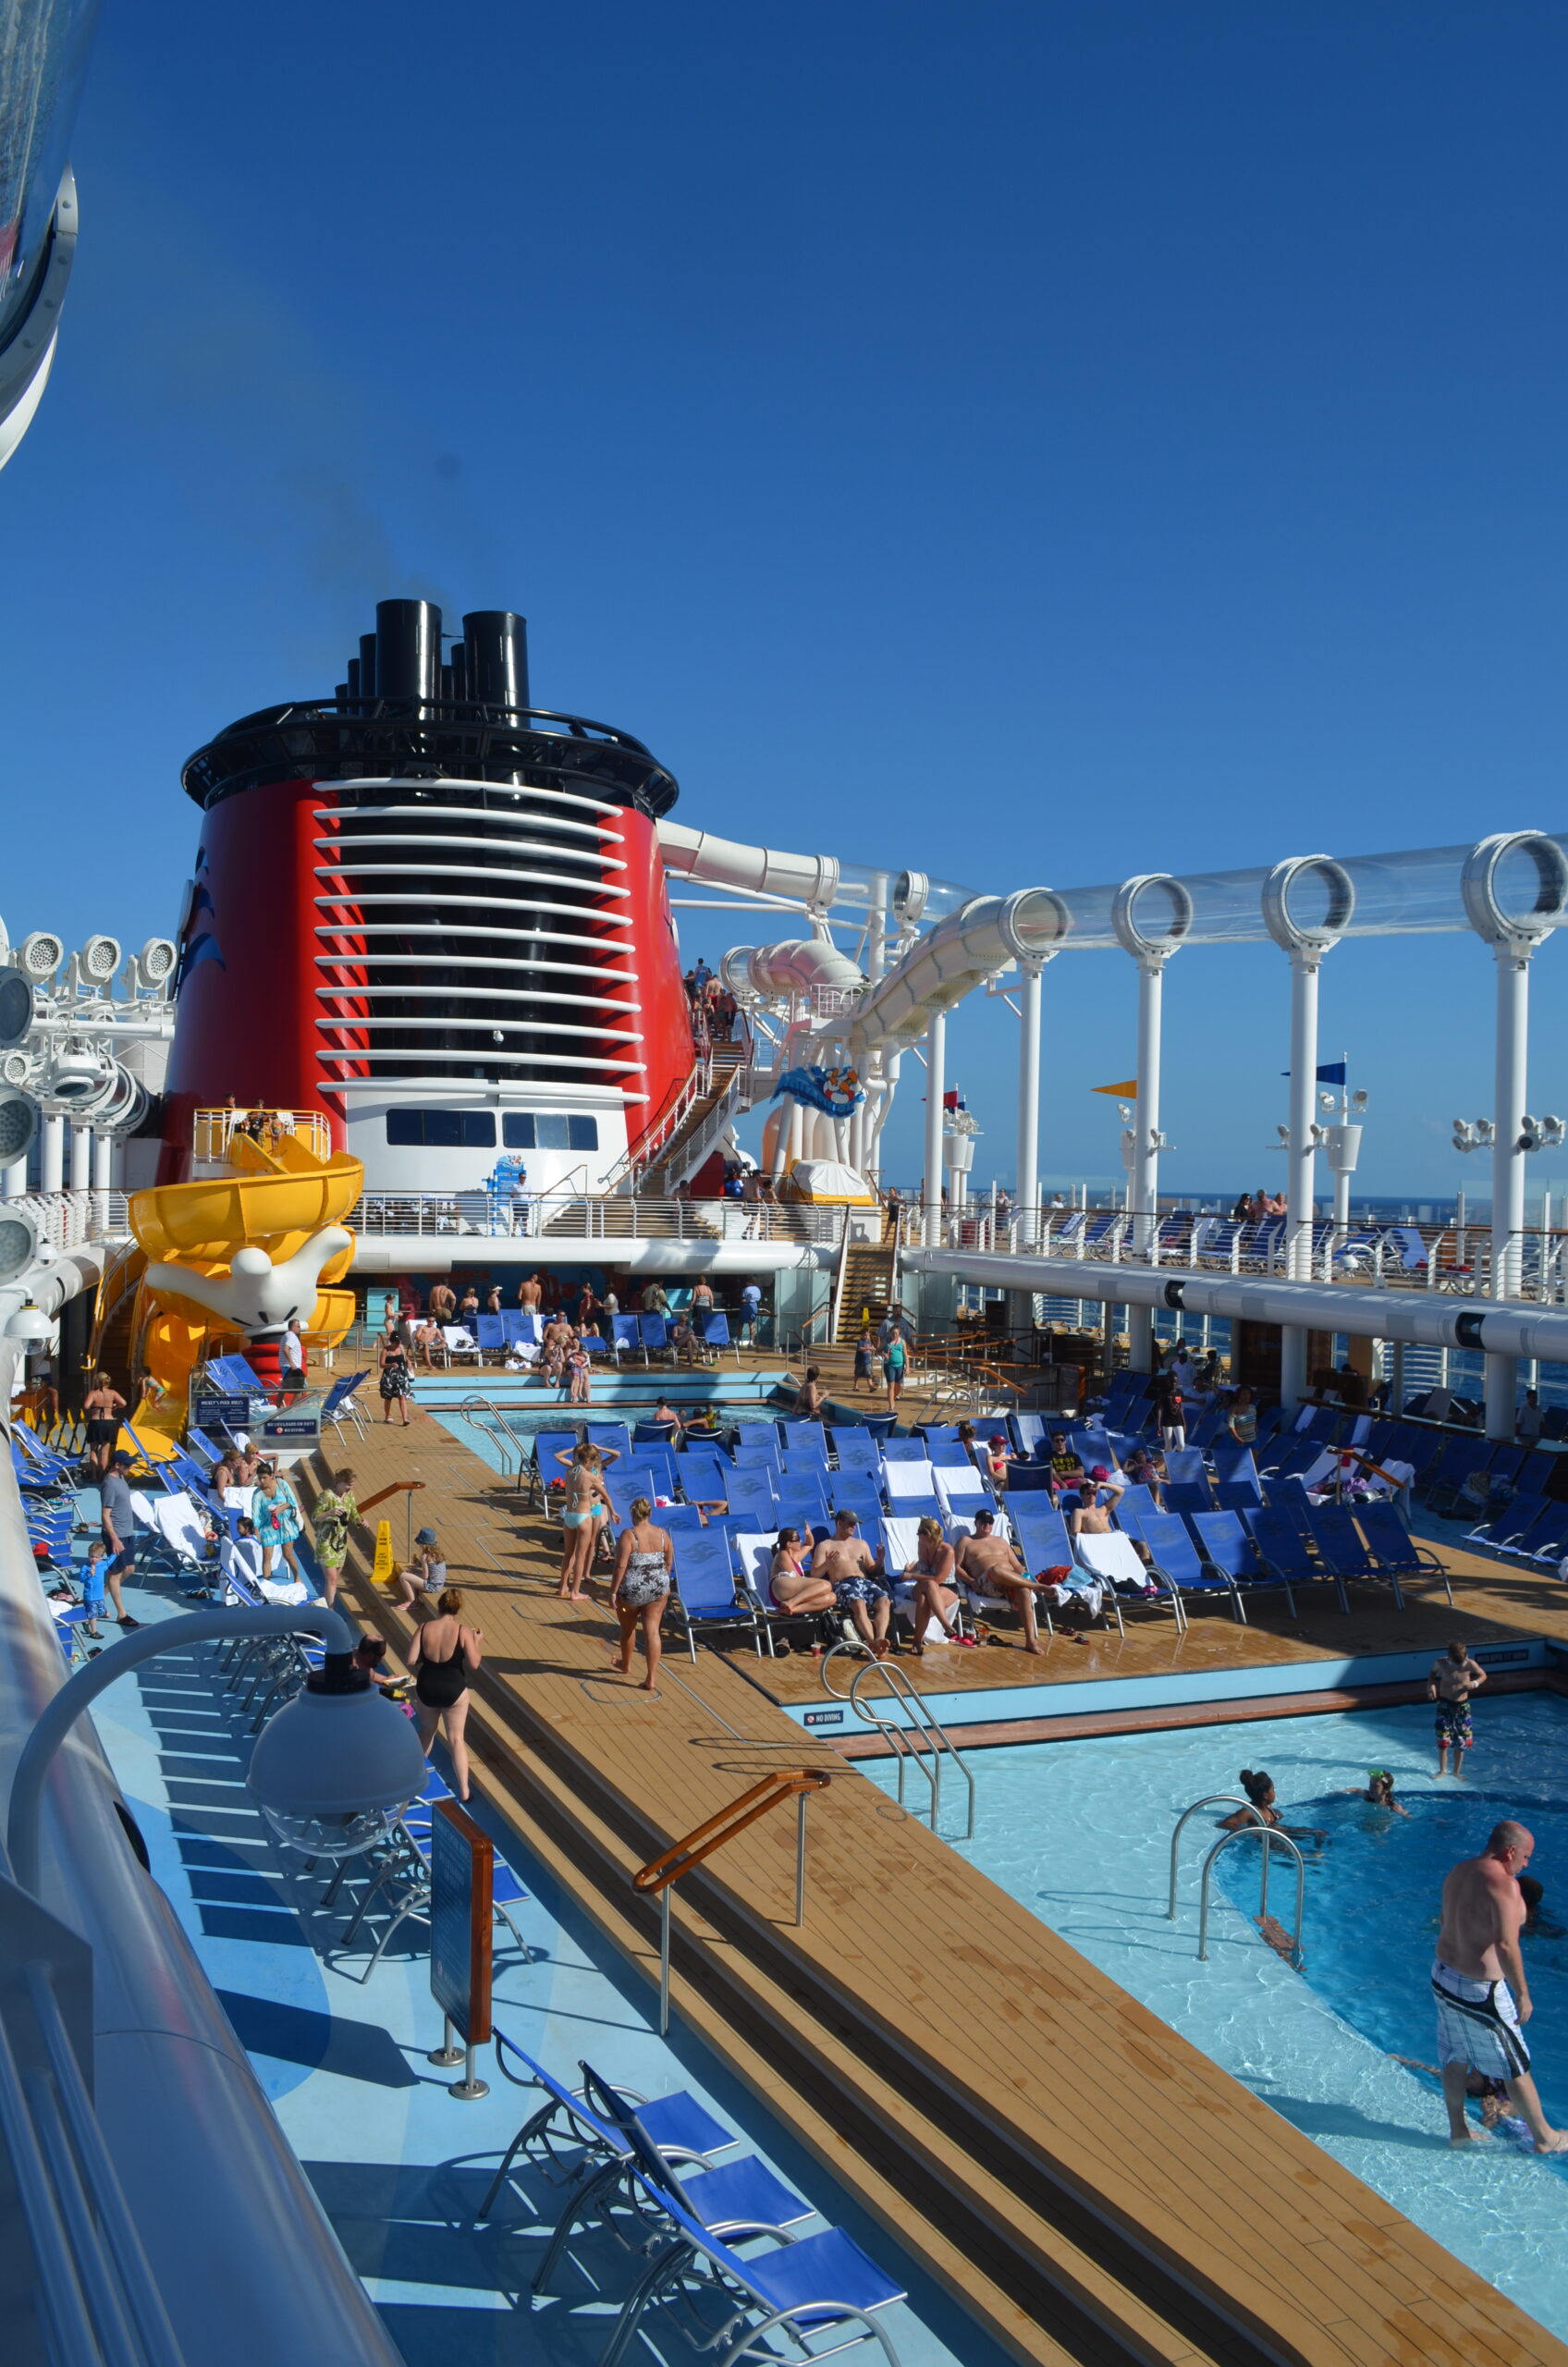 Pixie Travel agents can book your Disney Cruise Line vacation